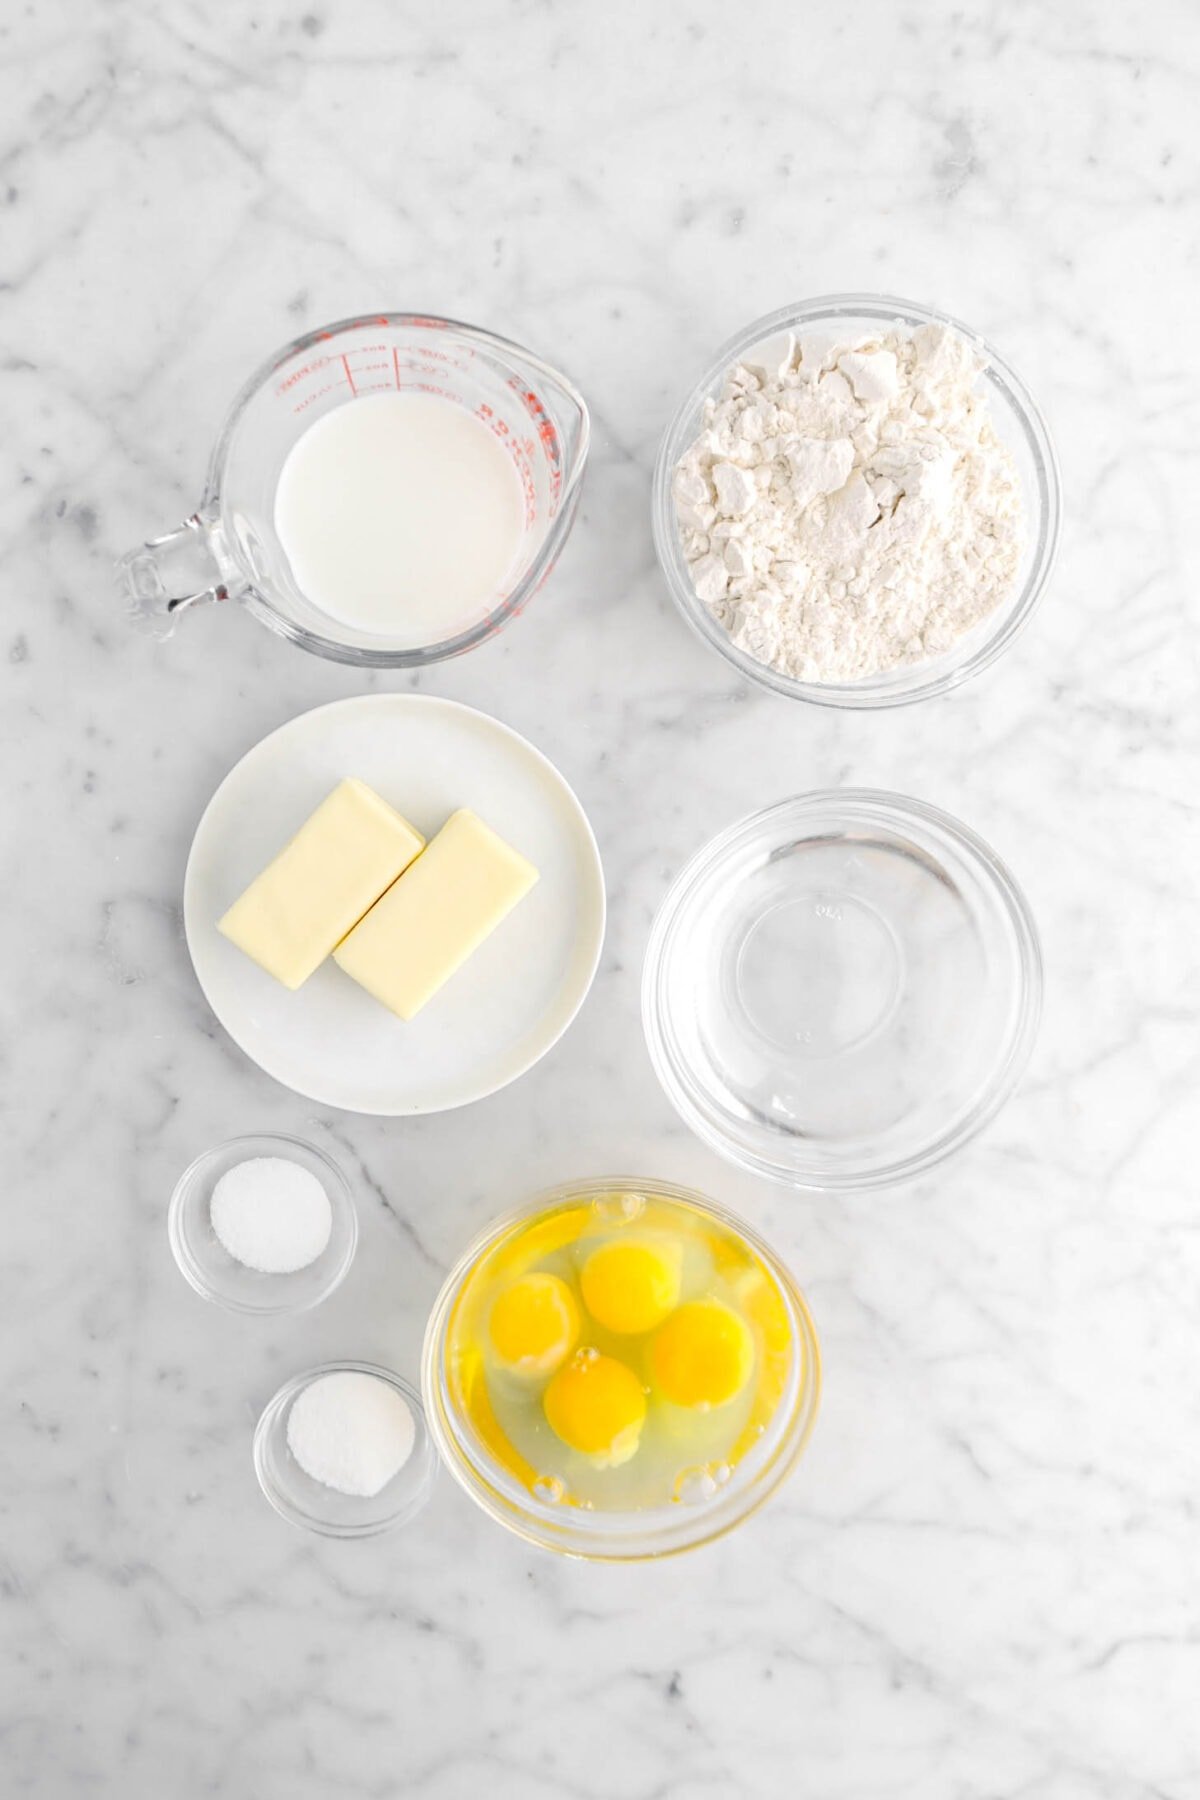 milk, flour, butter, water, salt, sugar, and eggs on marble surface